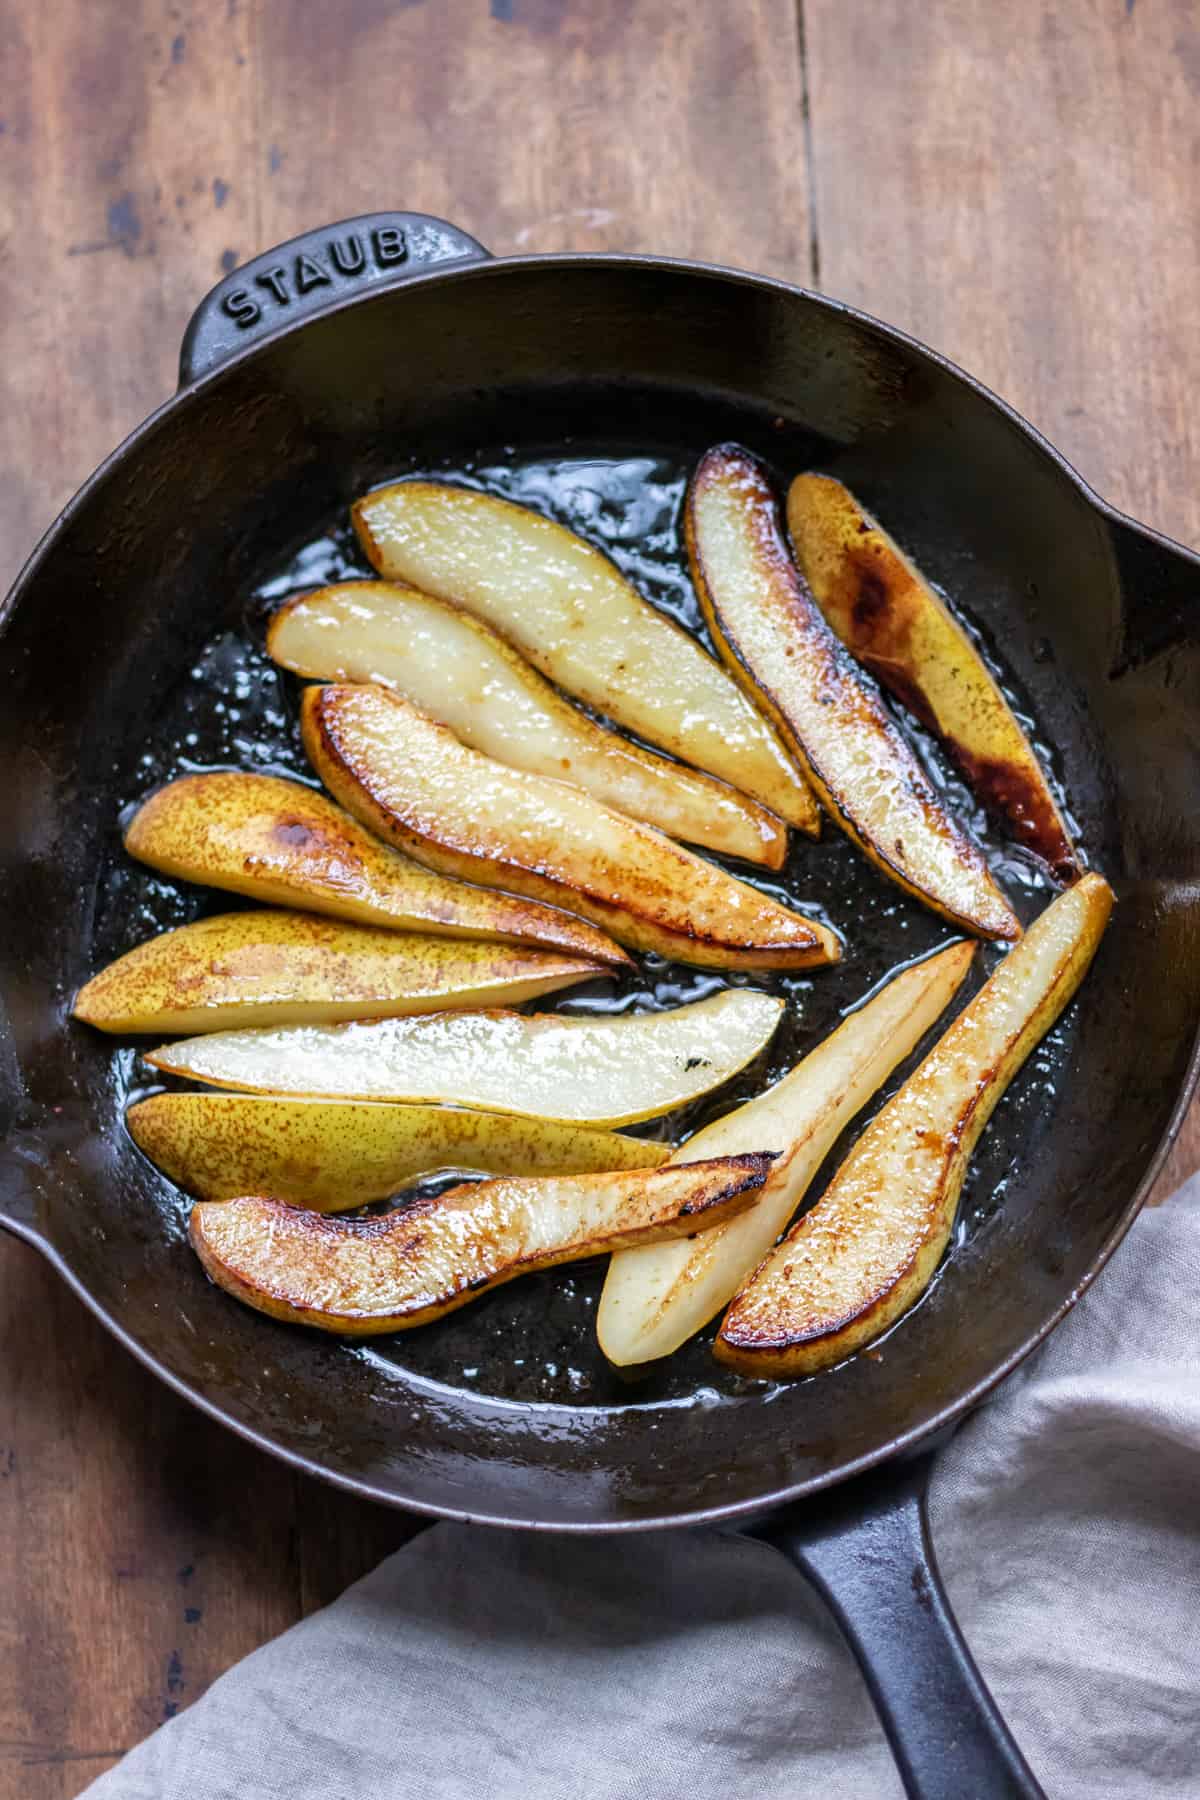 Skillet of cooked pear slices.